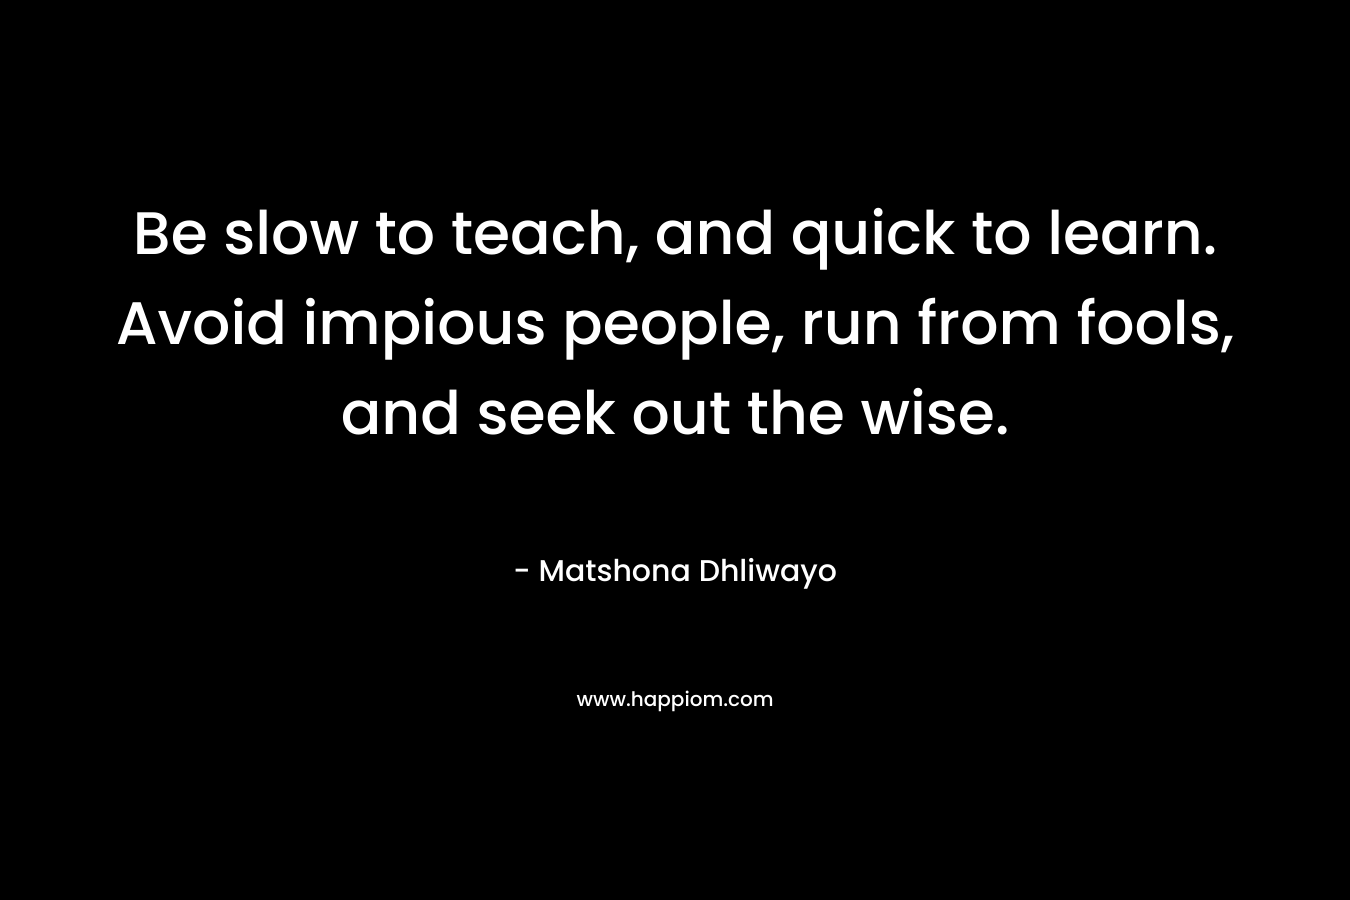 Be slow to teach, and quick to learn. Avoid impious people, run from fools, and seek out the wise.